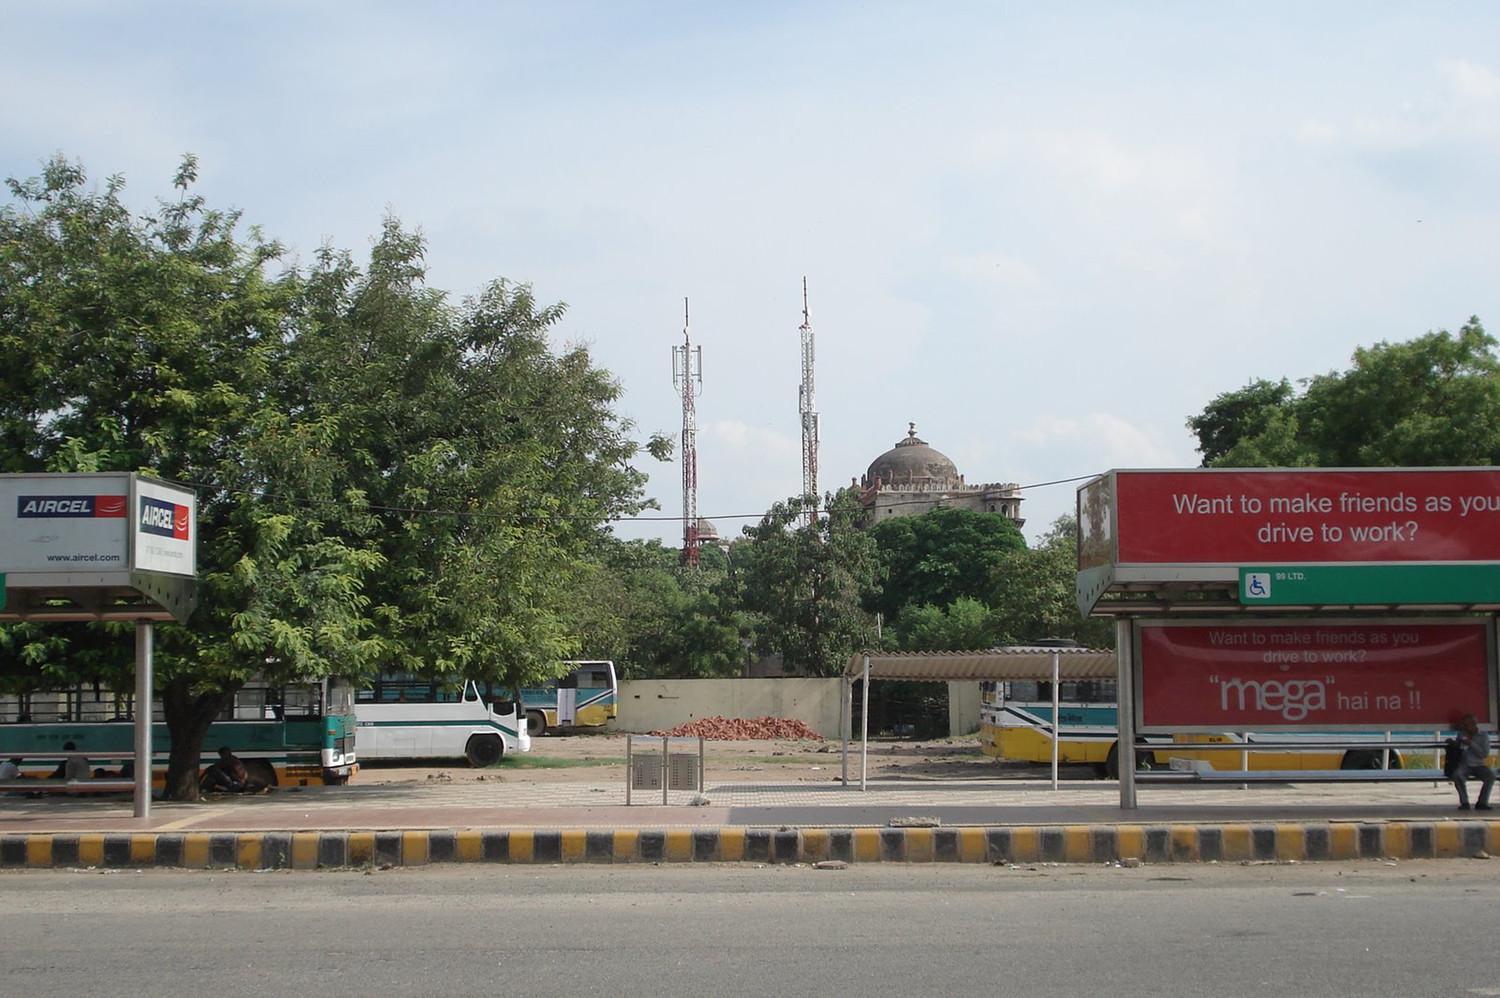 Before-View of Pragati bus terminal from Bhairon Marg